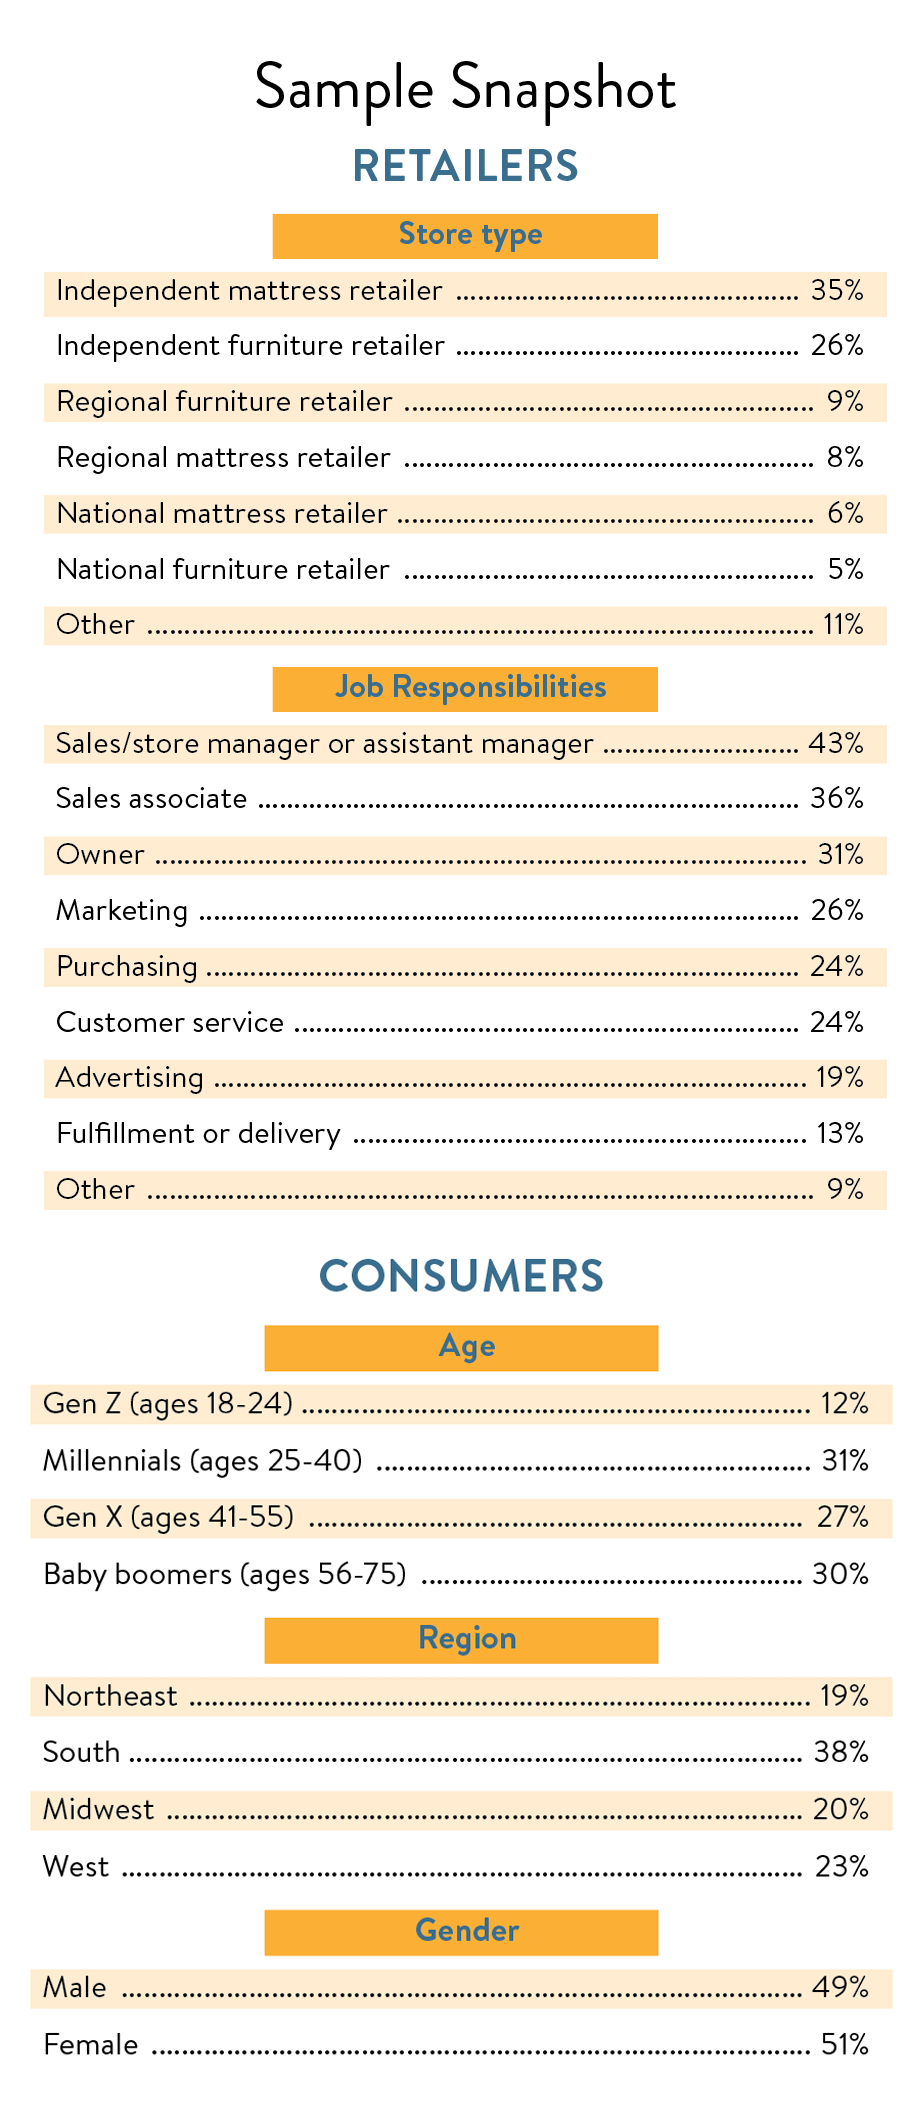 Sample snapshot of retailer and consumer data from survey.